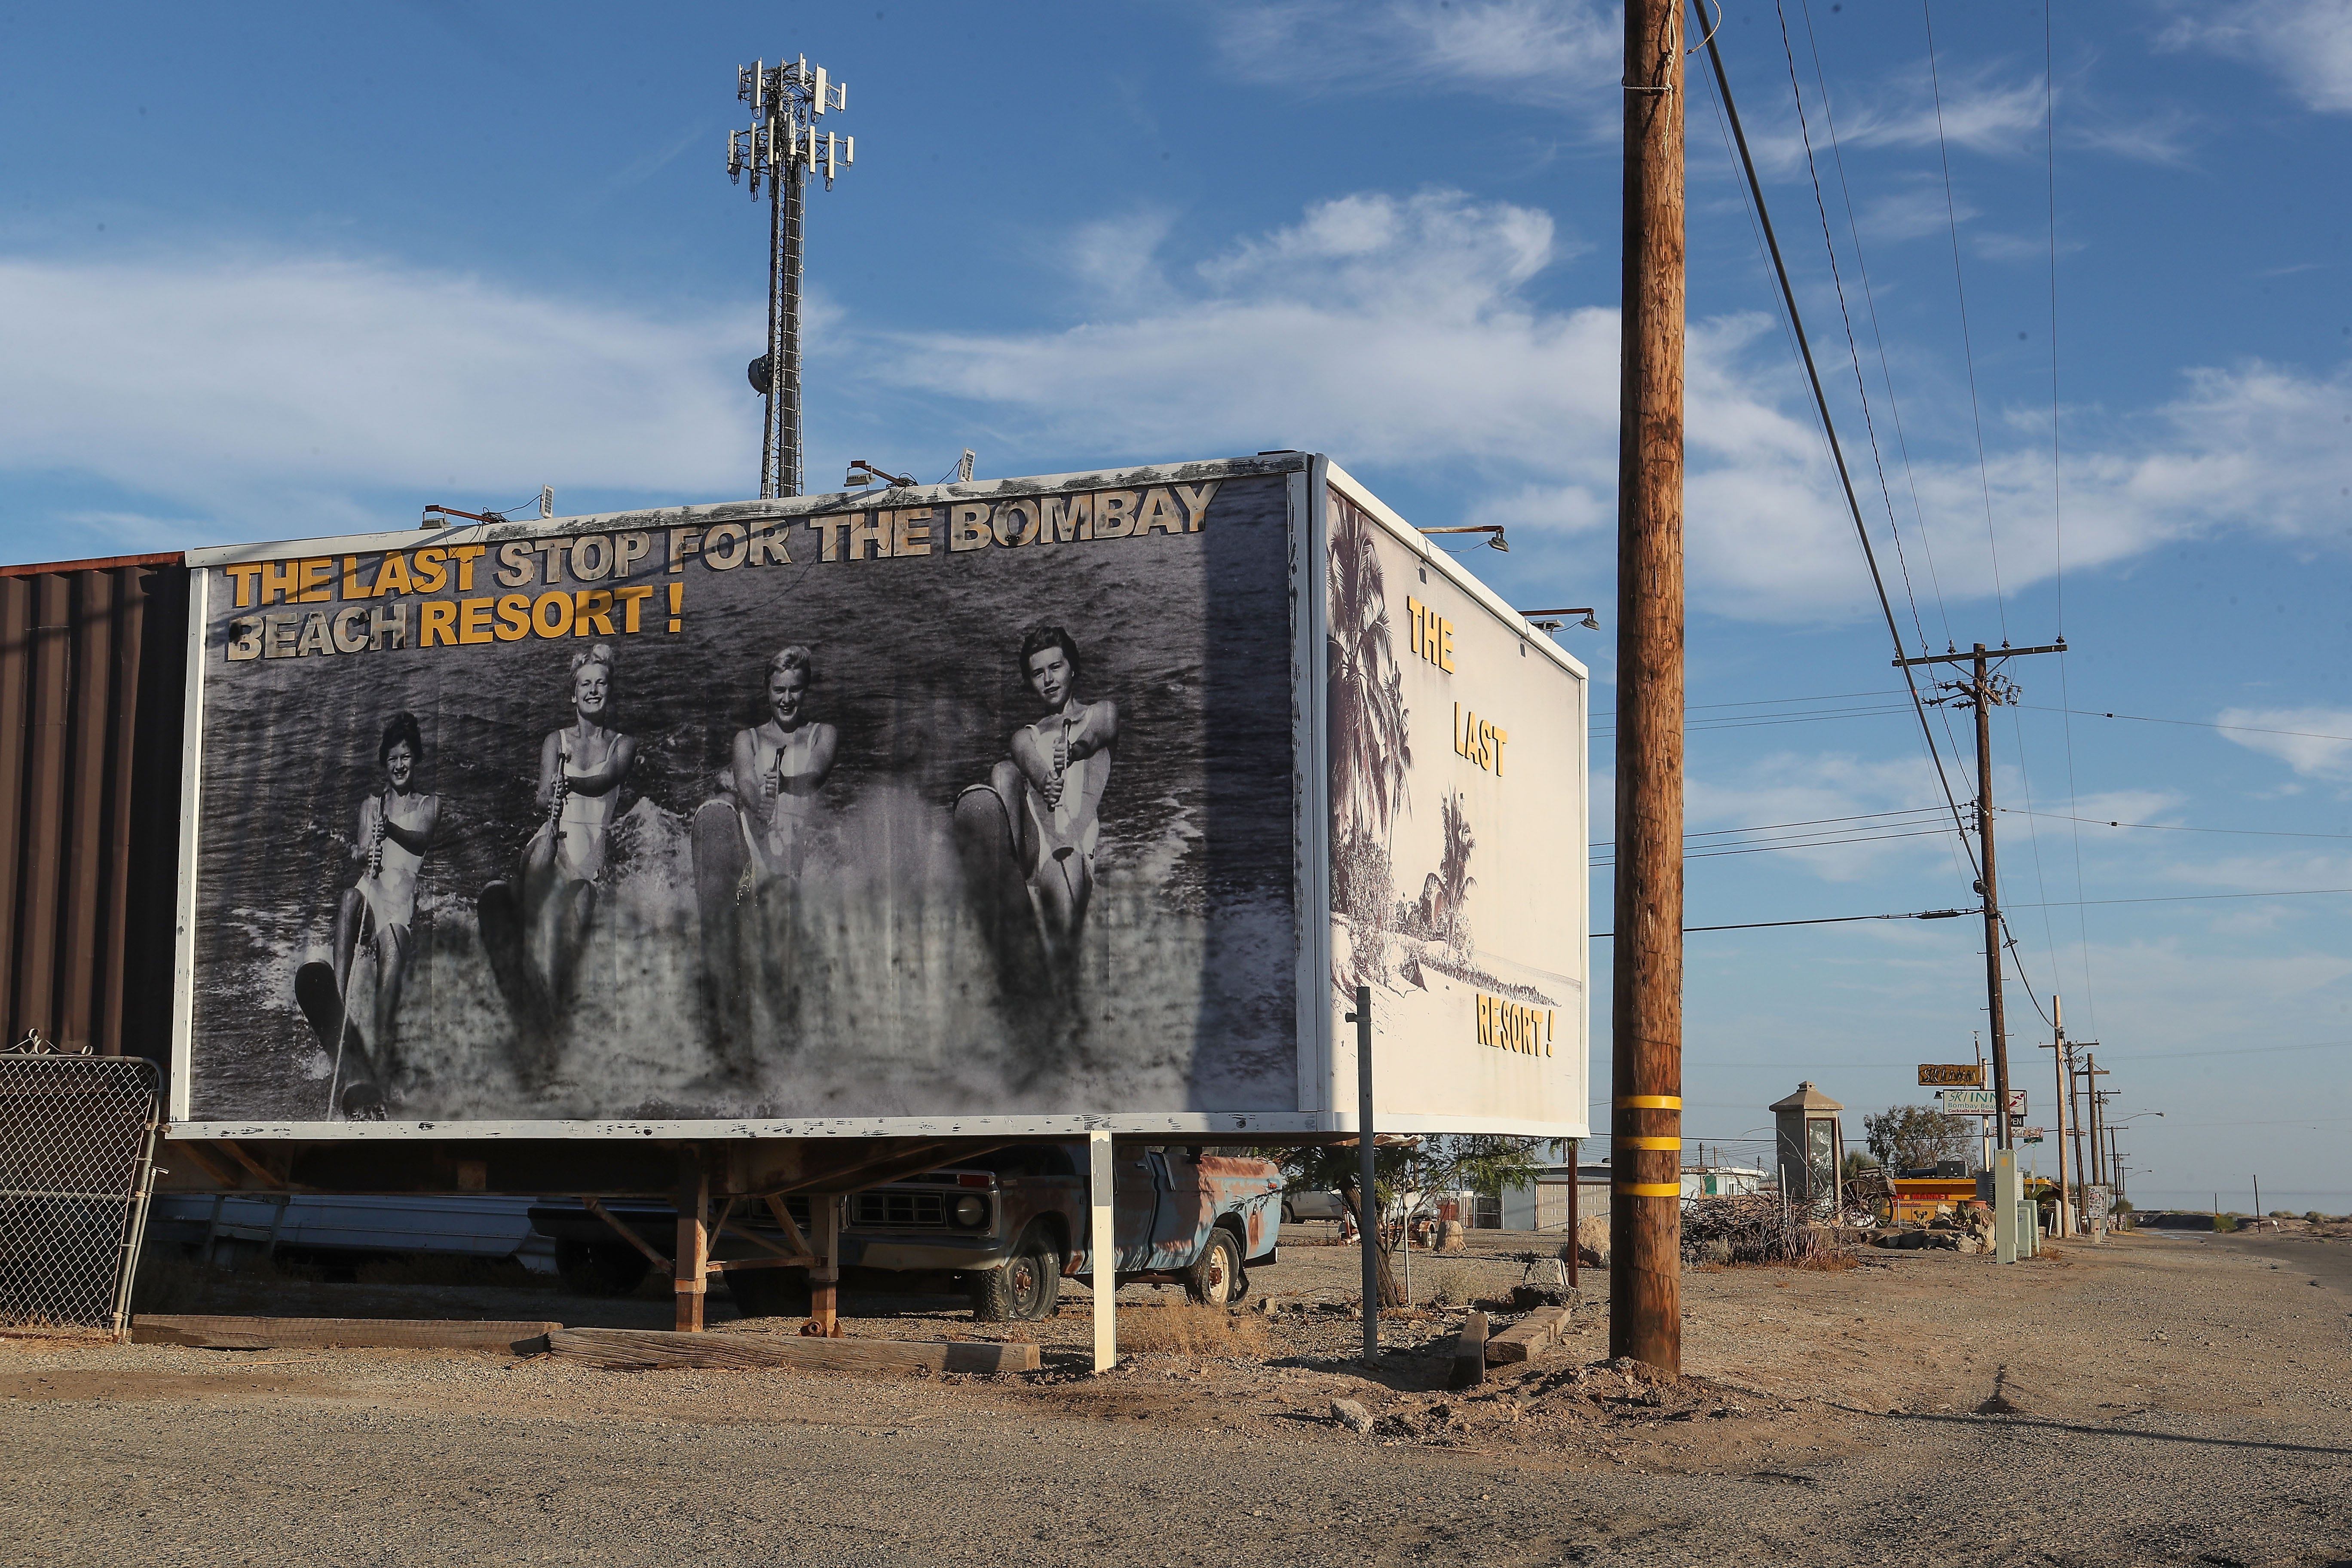 The small community of Bombay Beach has had a mini-resurgence and by 2020 had become popular with artists and eccentrics.